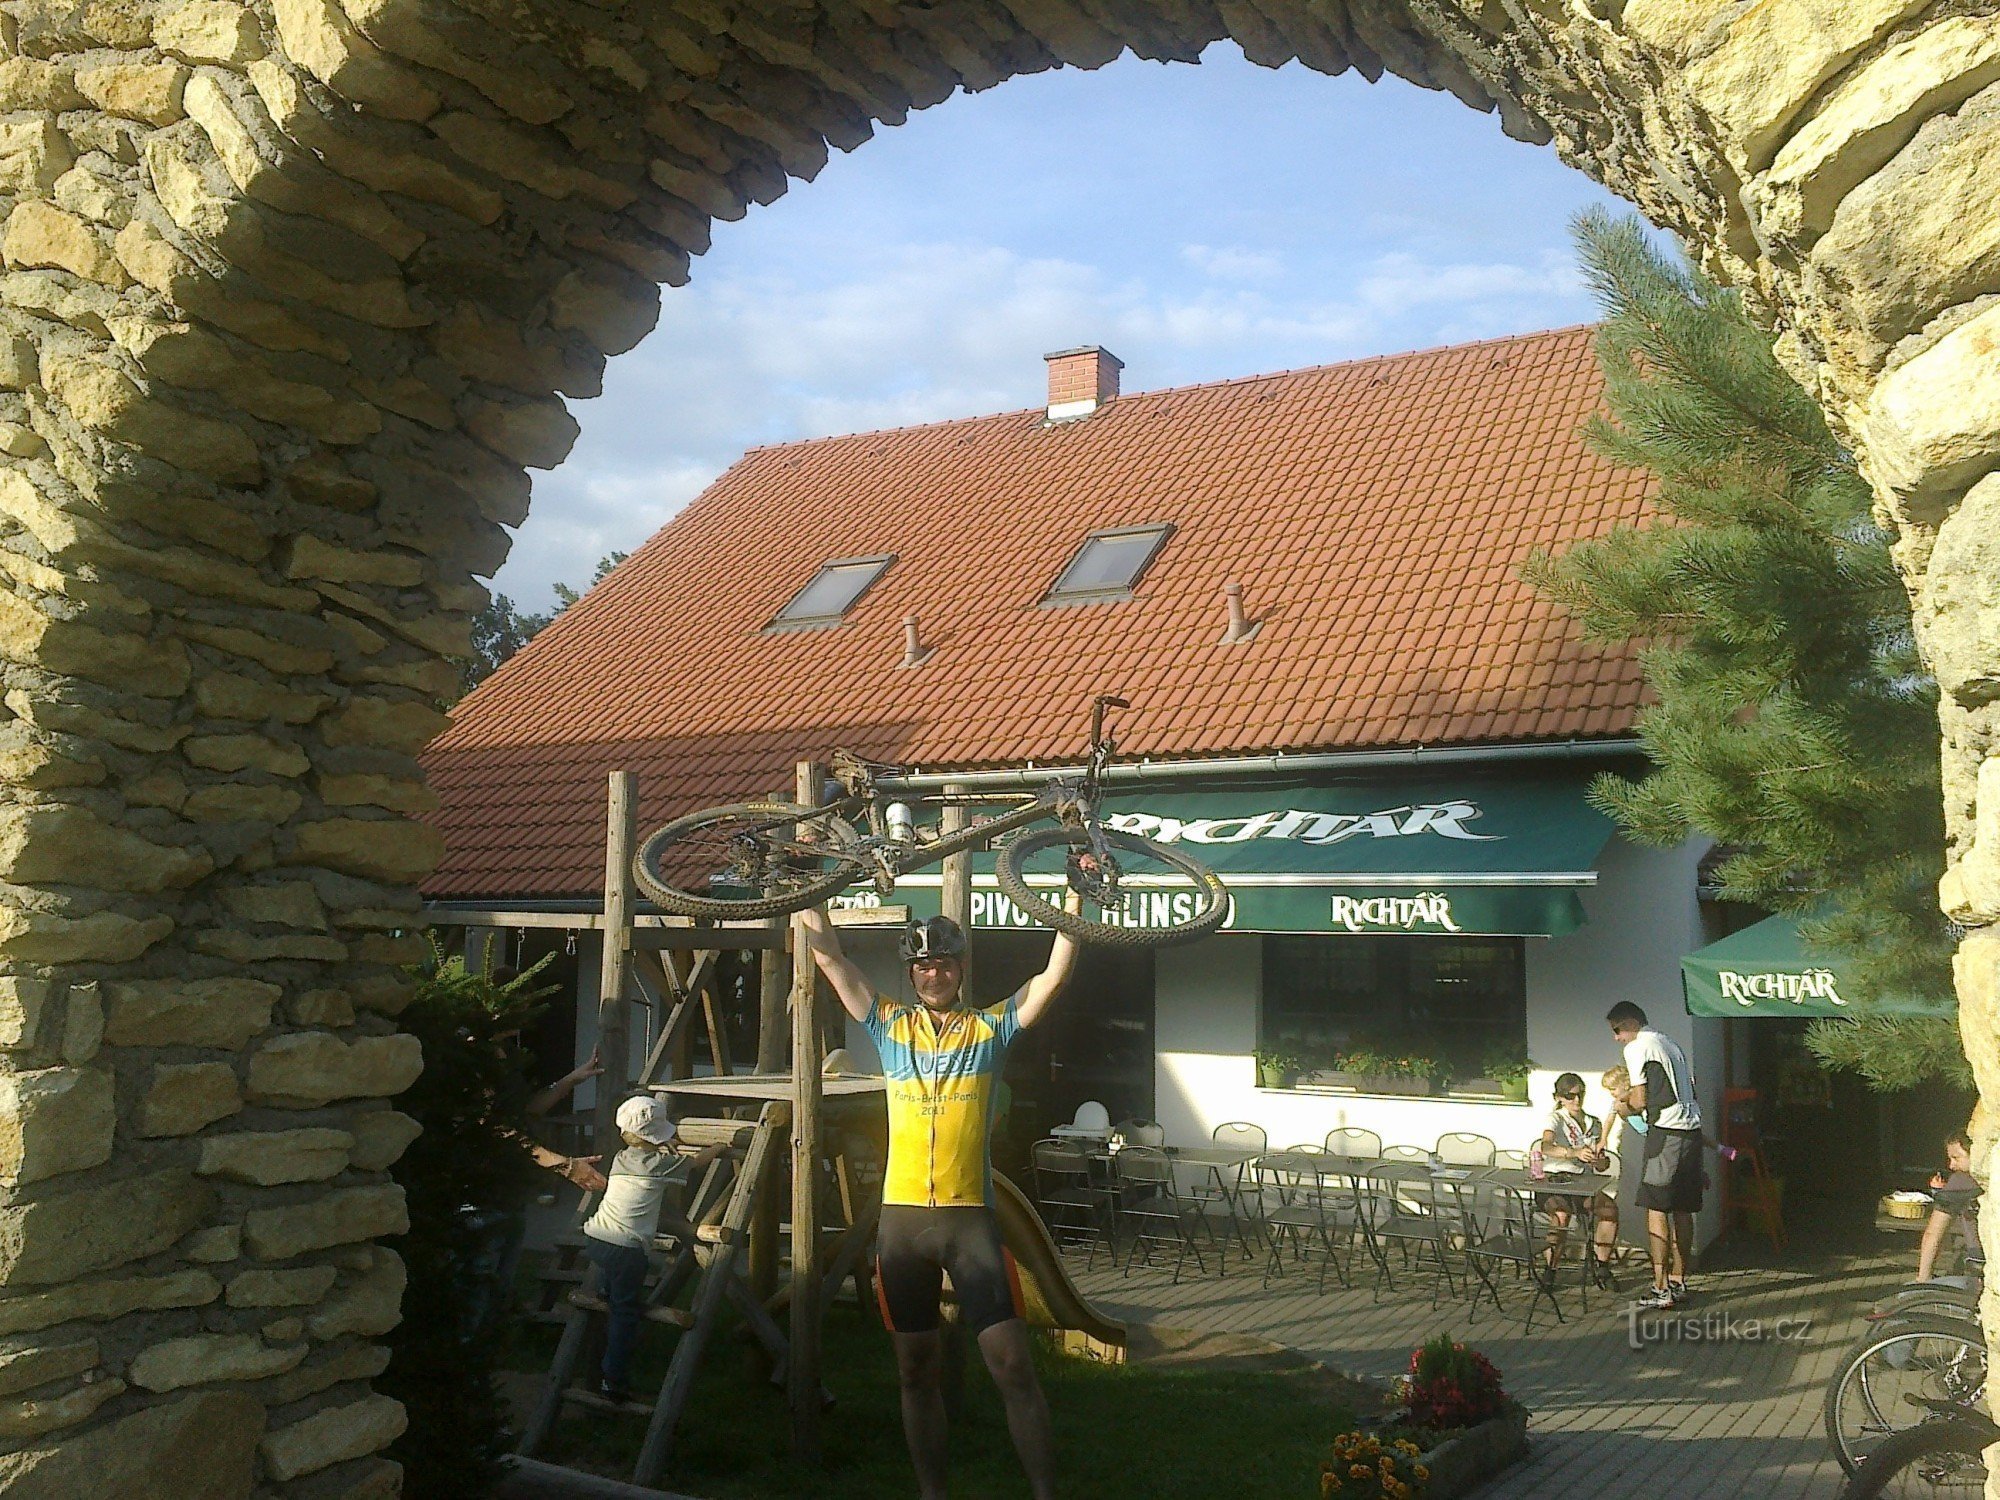 Pelestrovská pub - an oasis for cyclists and cross-country skiers